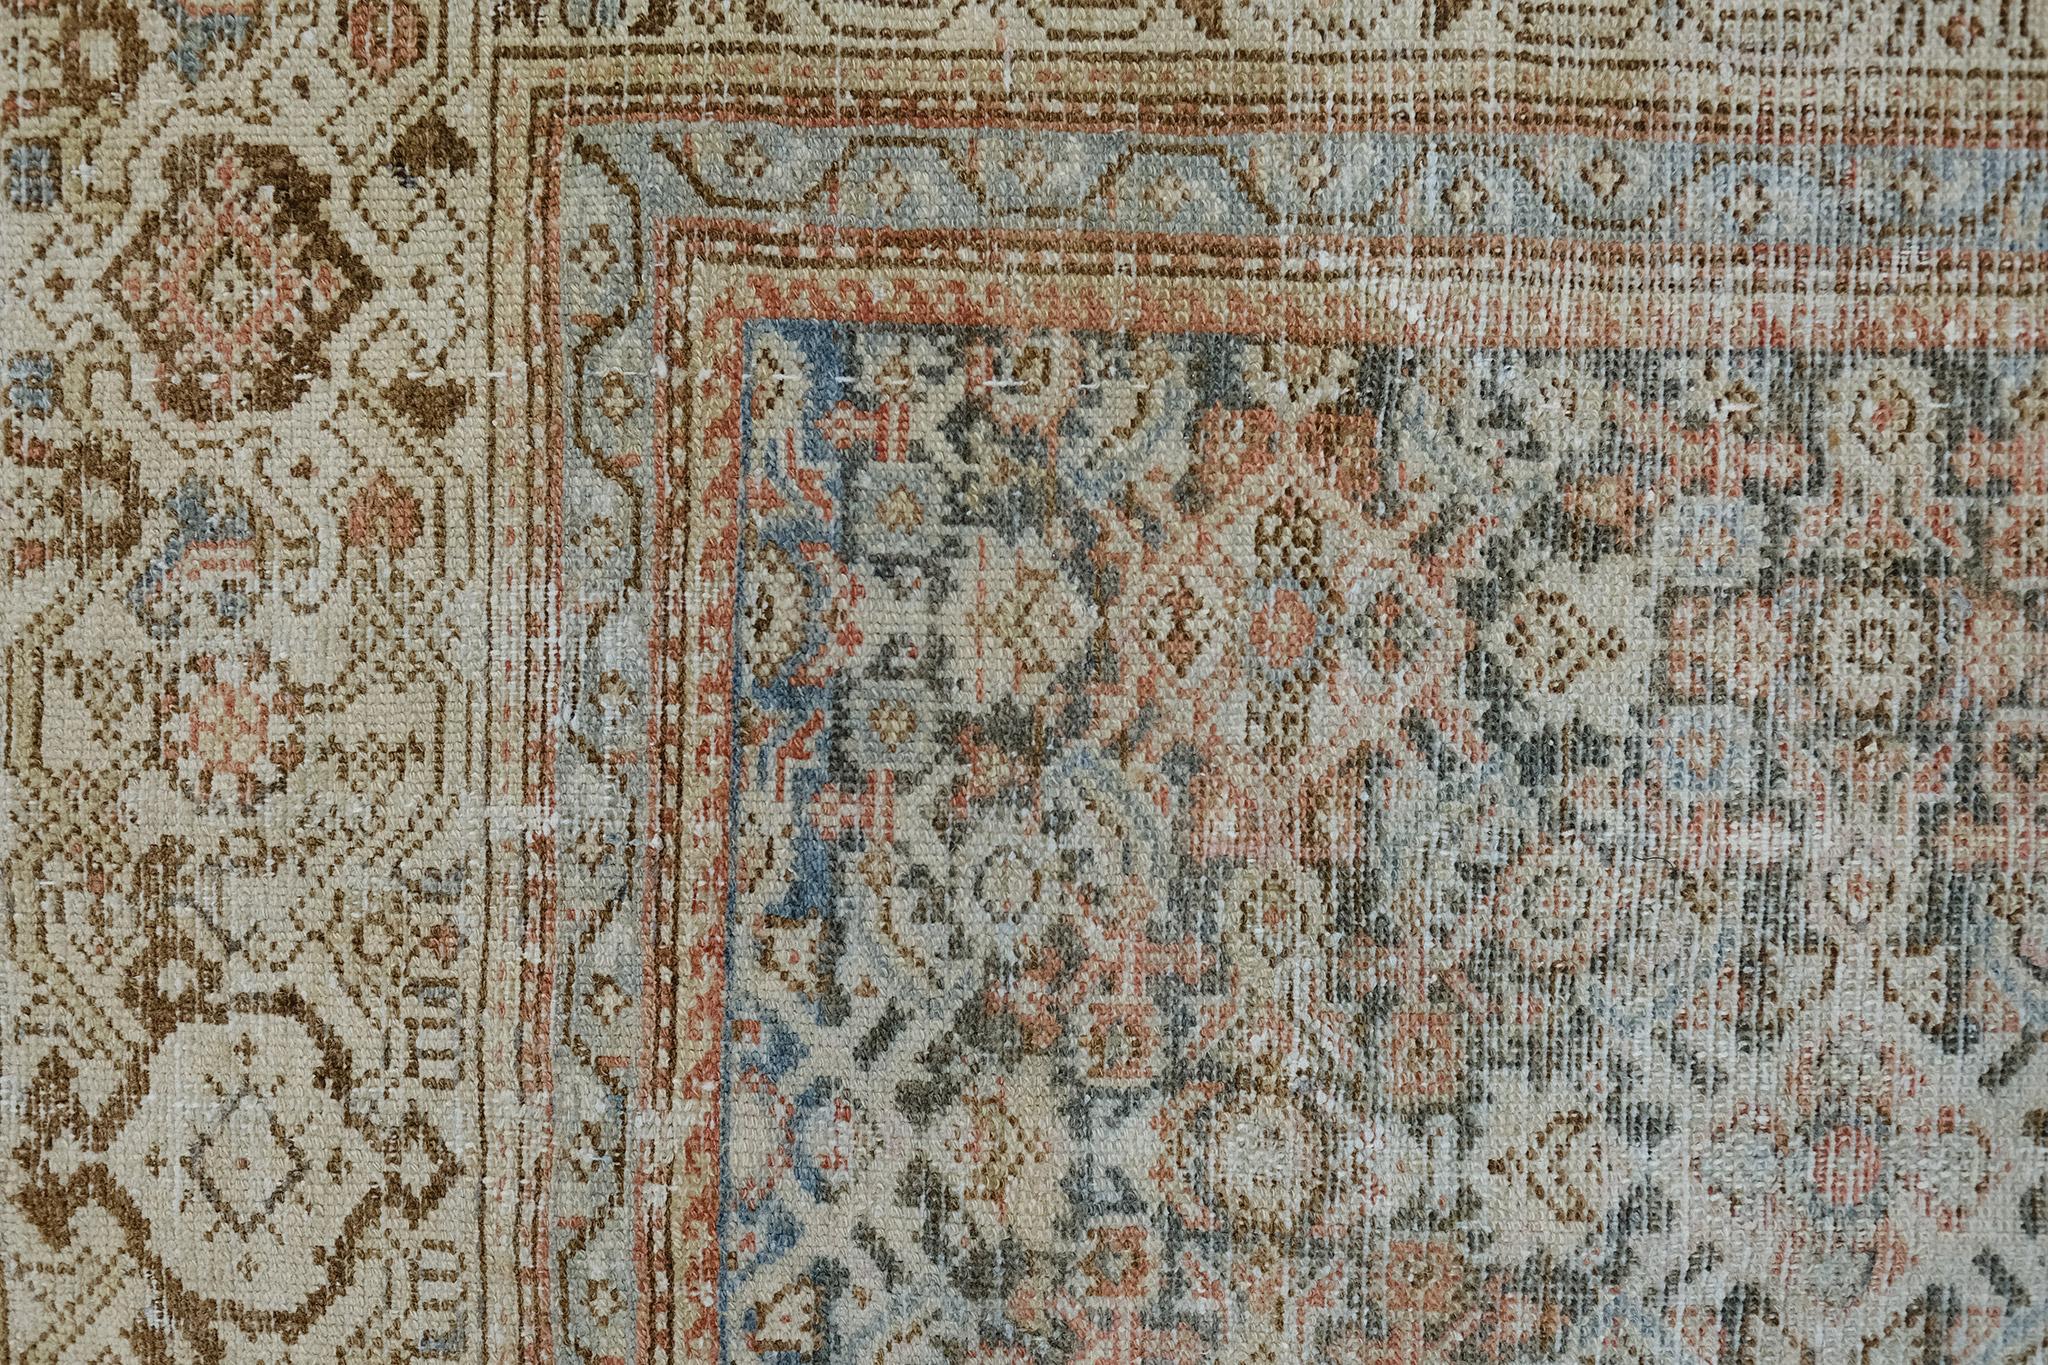 With its elegant vibe and impressive time-worn appeal, this antique Persian Malayer rug embodies a rustic botanical style. It features a dance of dainty florid elements that are graciously spread across the turquoise abrashed field. Effortlessly